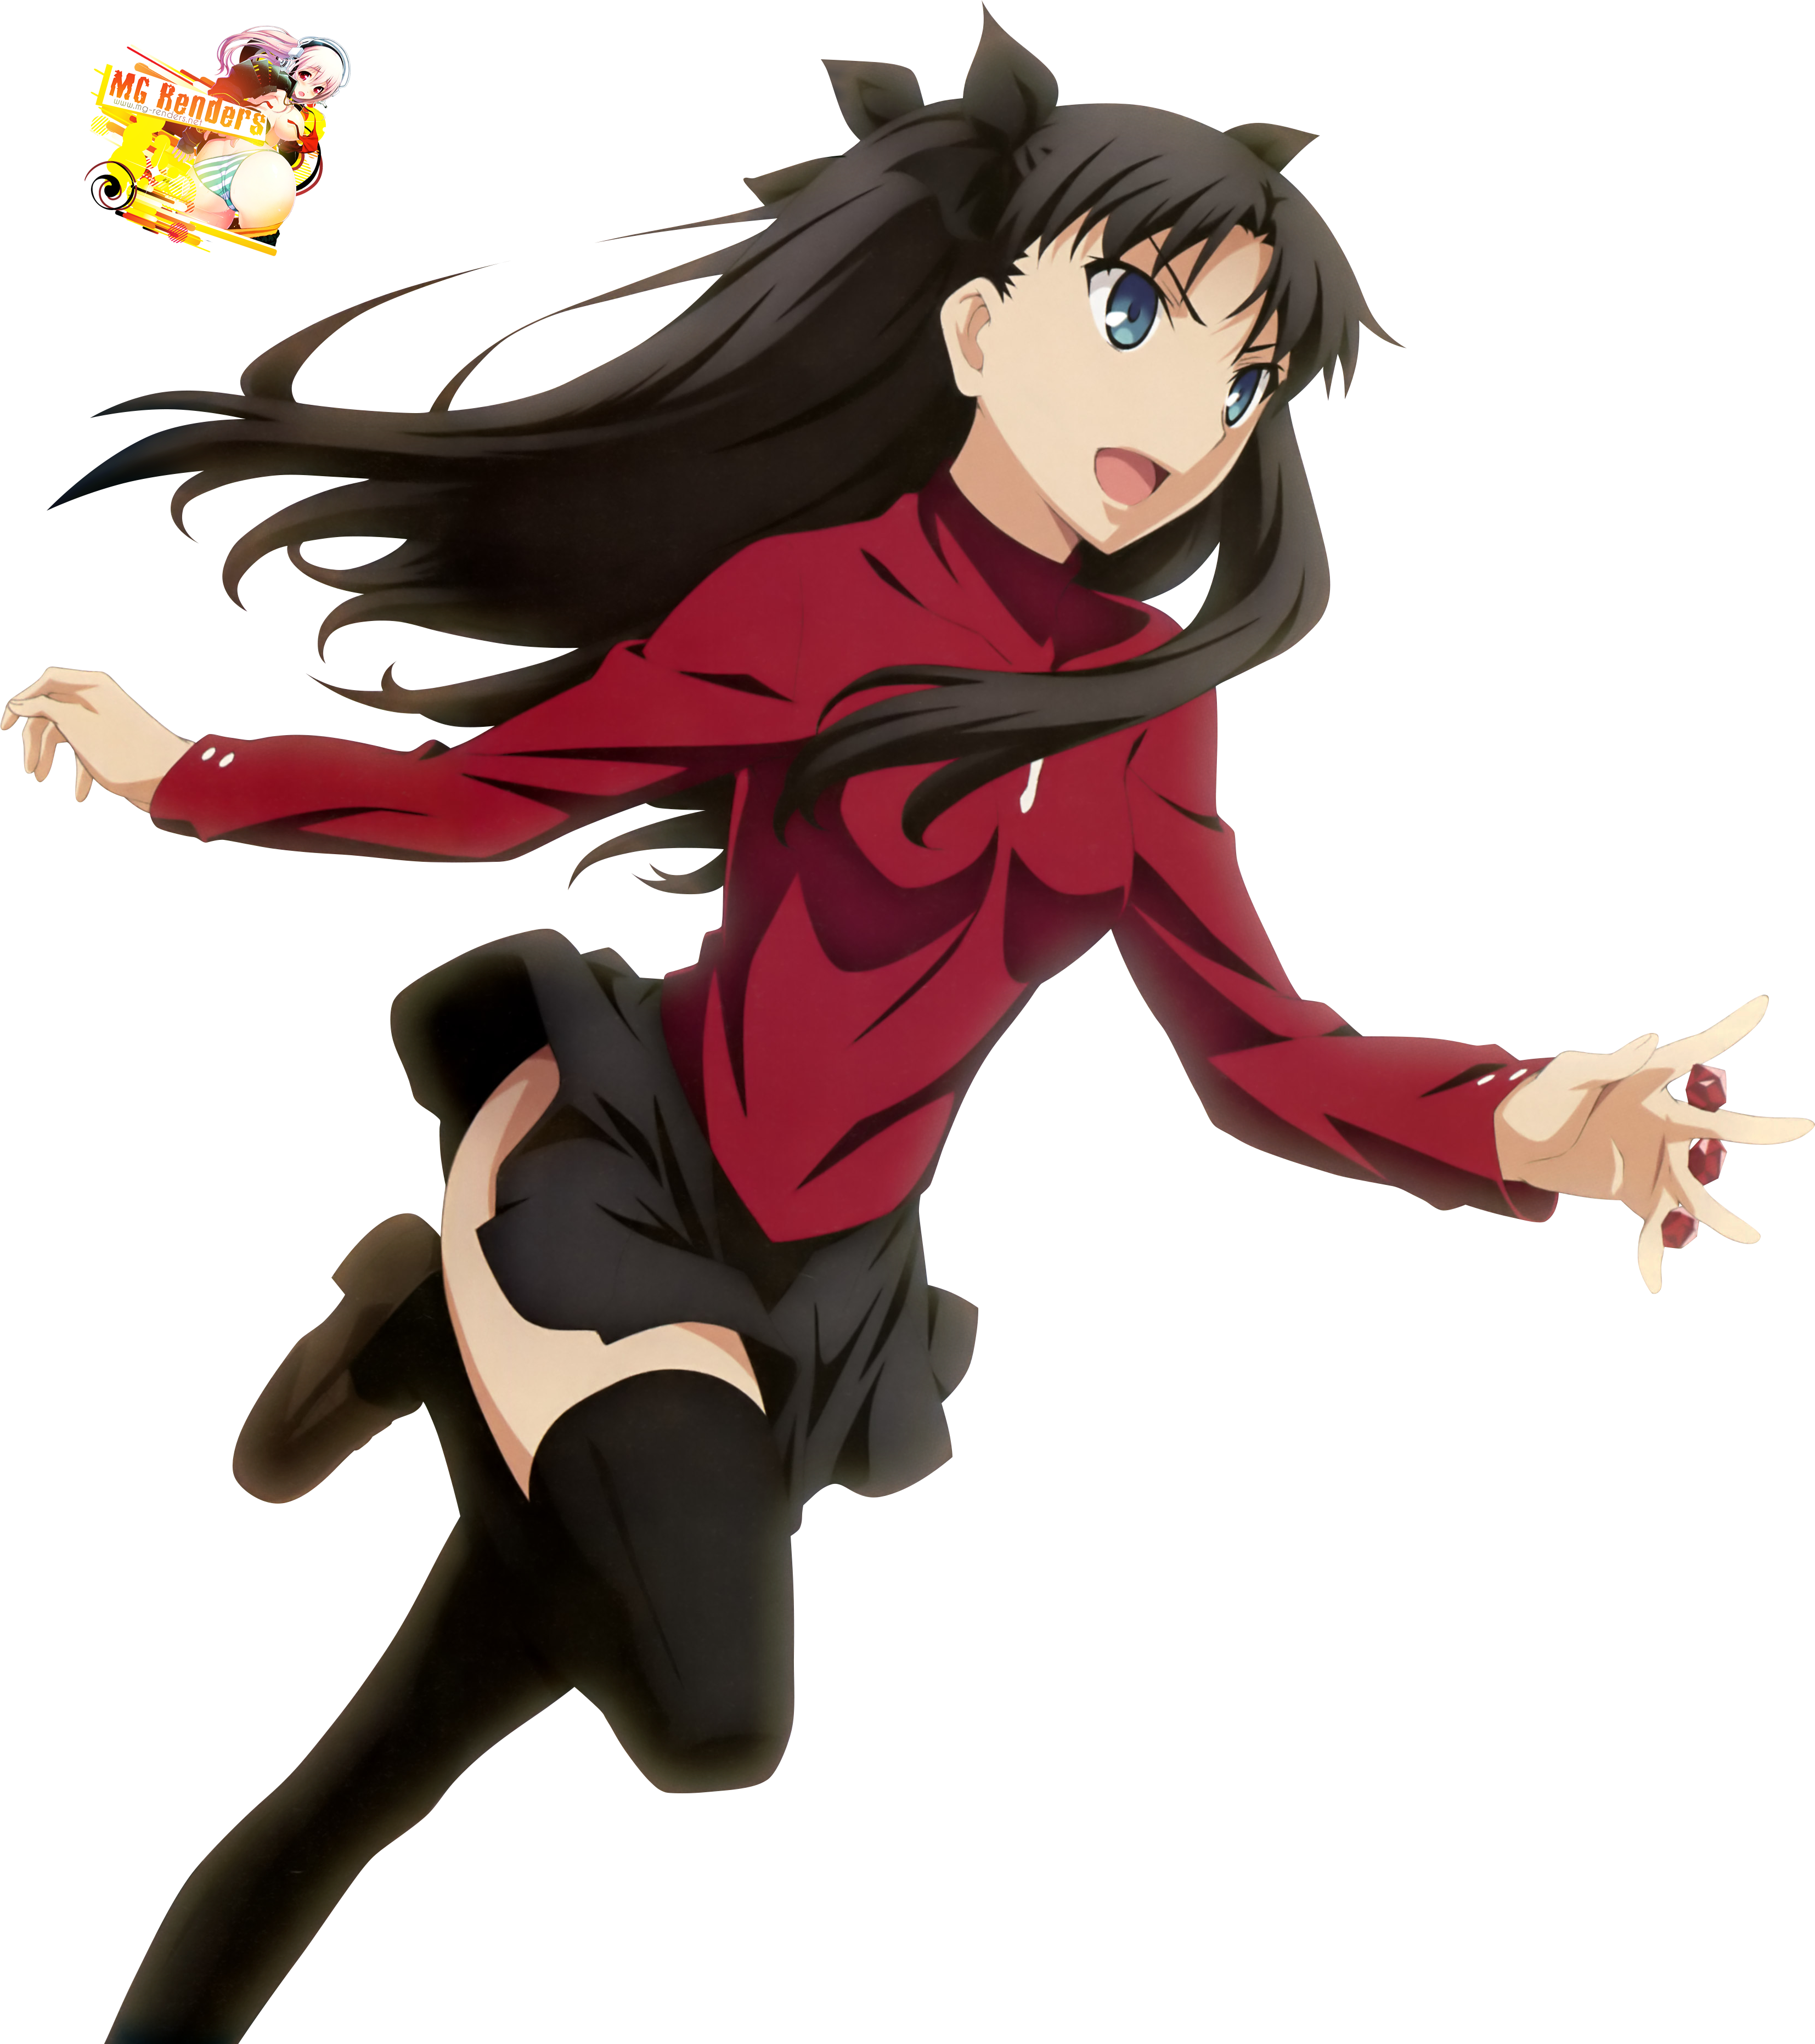 Fatestay Night Tohsaka Rin Render 14 Anime Png Image Without Background